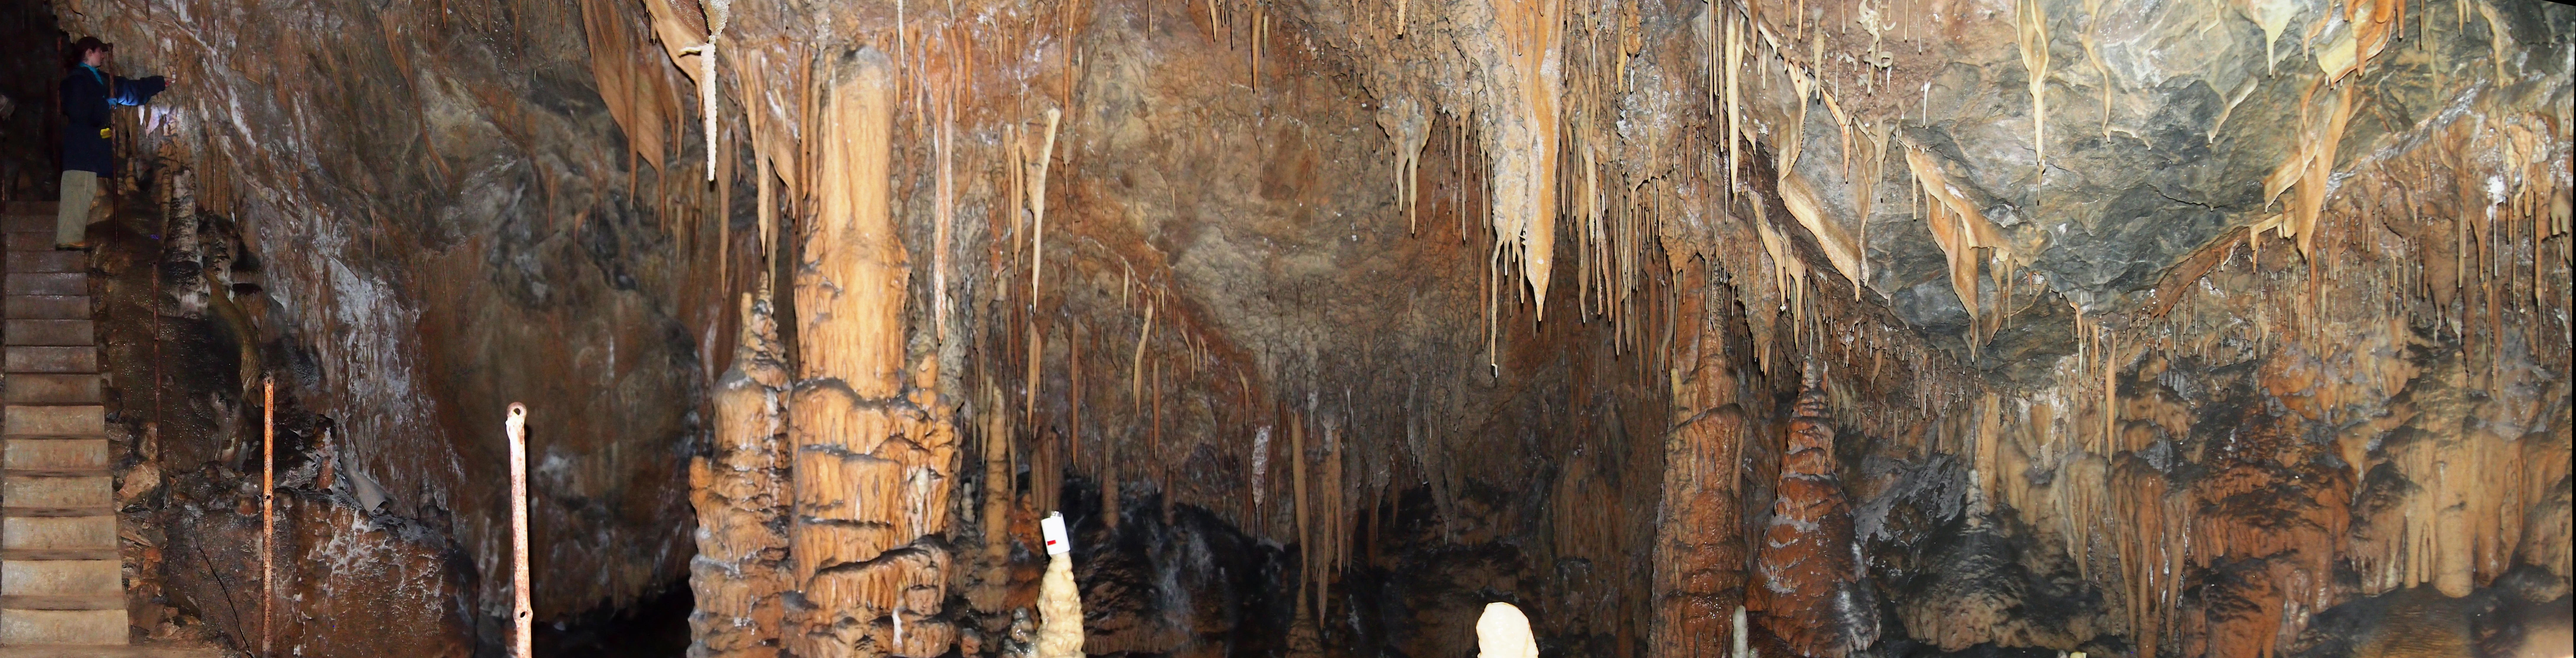 Harrie Wood Cave, Yarrangobilly, Australia. Image credit: Dr Andy Baker.